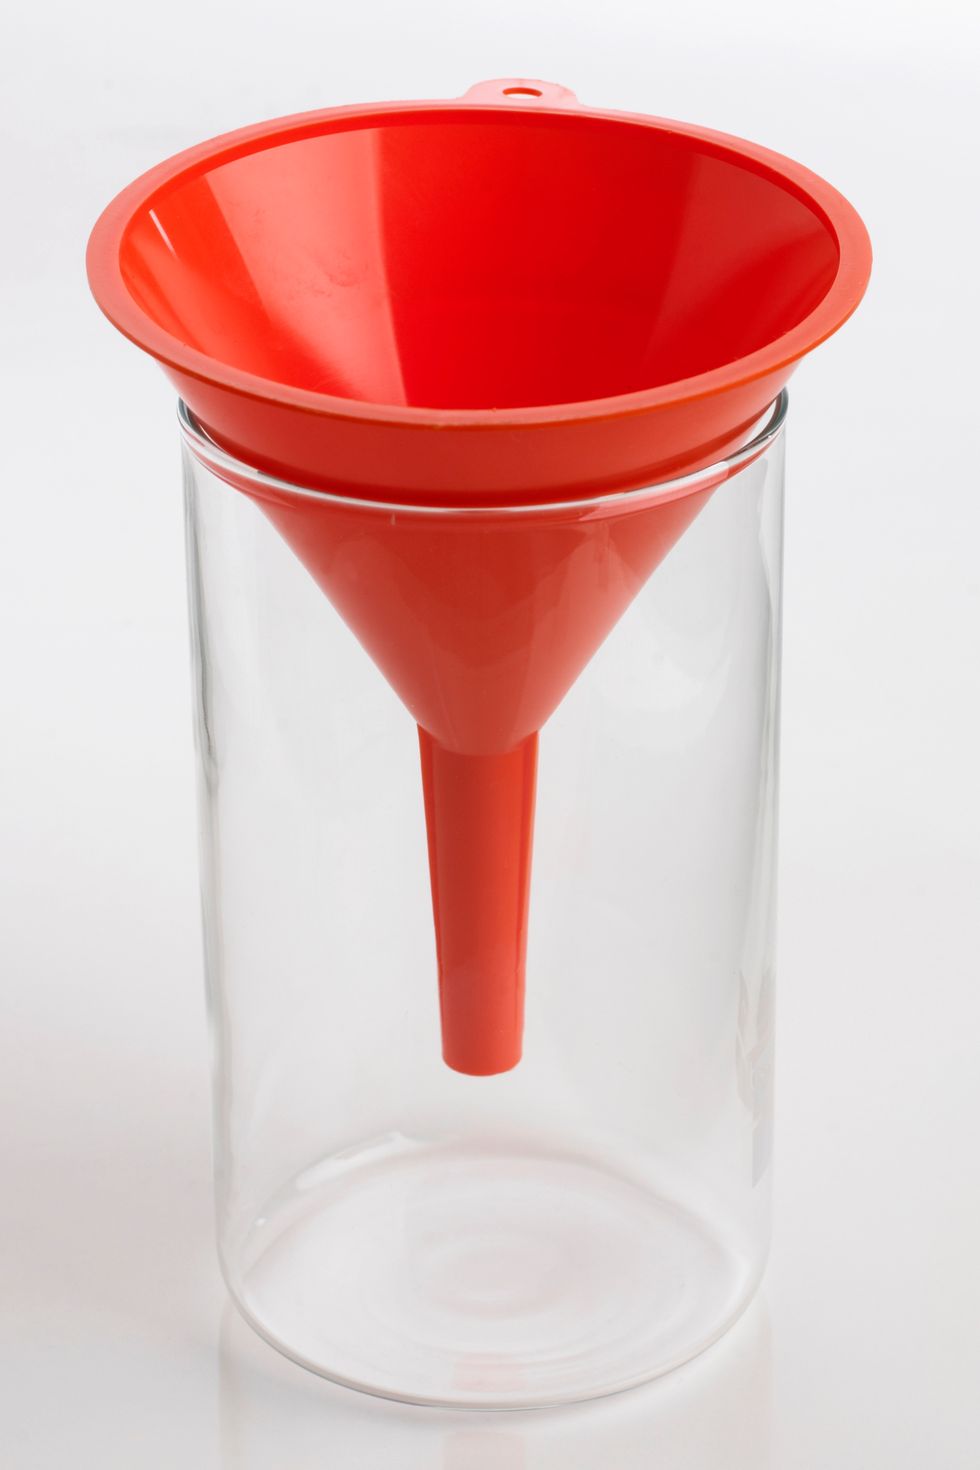 Red, Glass, Orange, Carmine, Coquelicot, Maroon, Drinkware, Material property, Artifact, Plastic, 